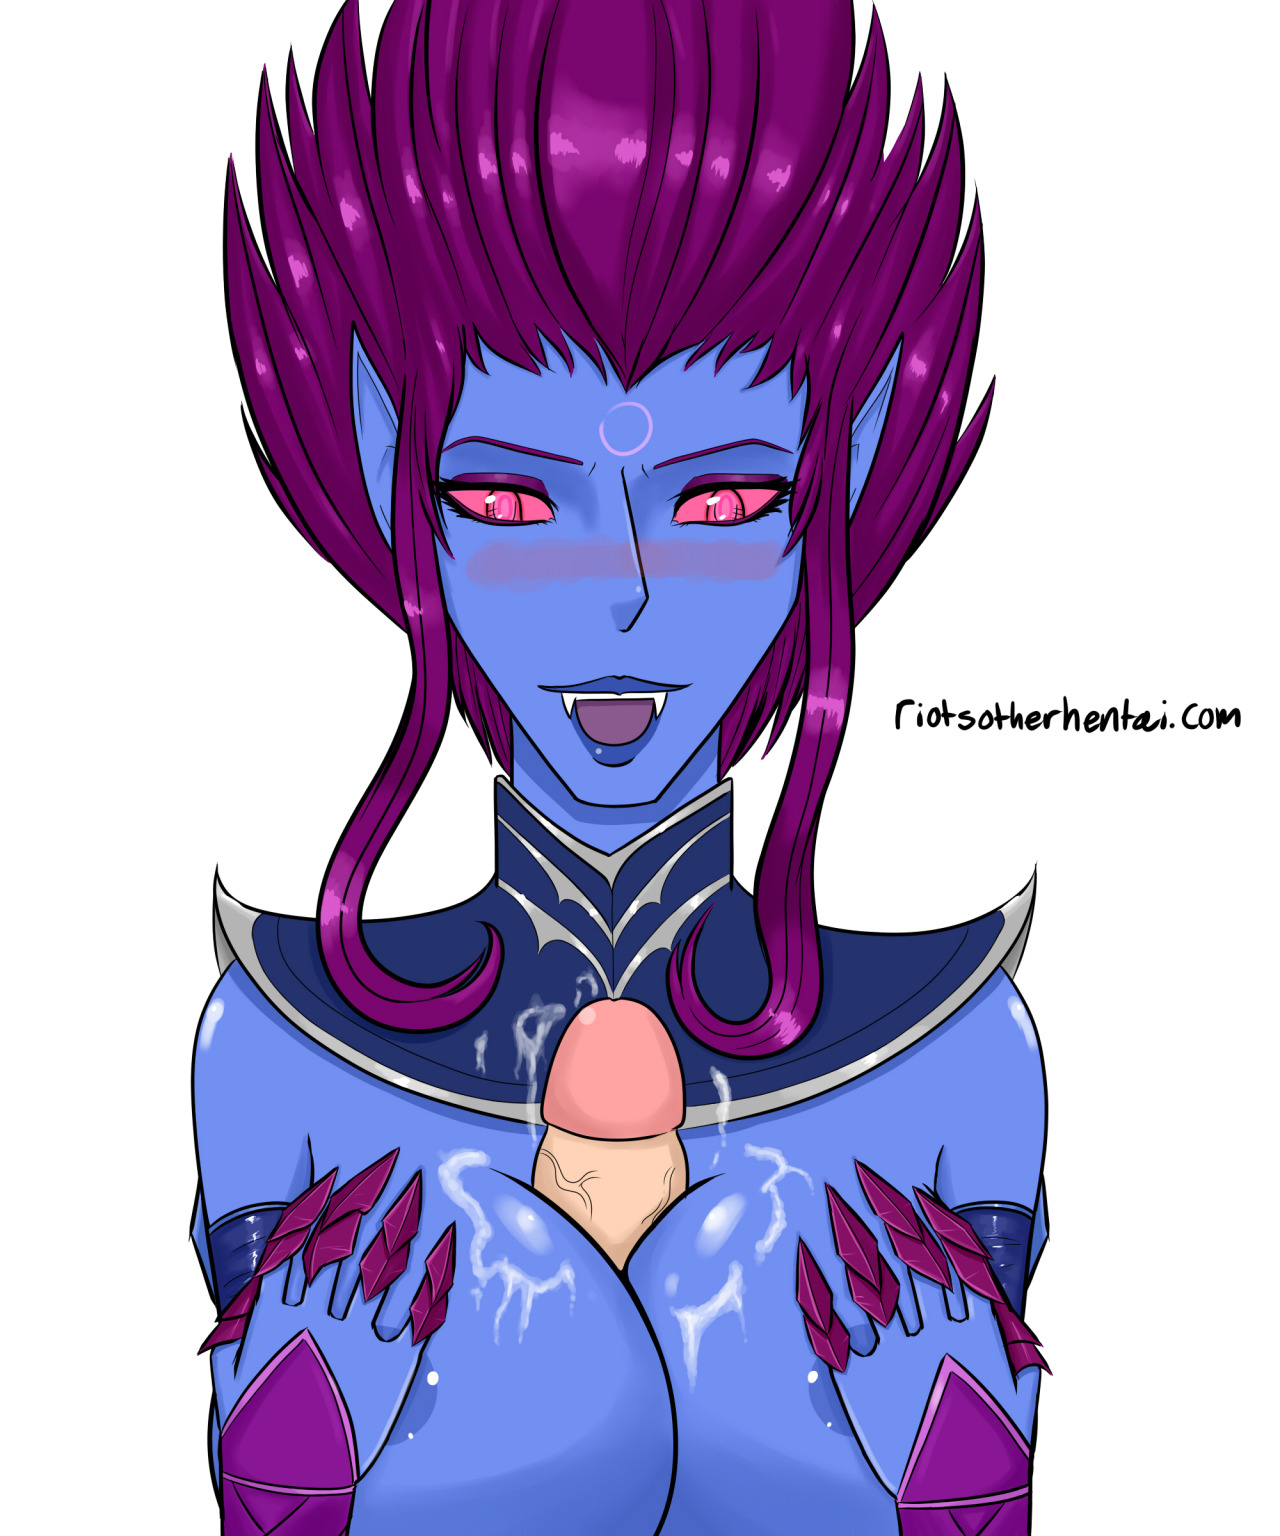 riotsotherhentai:  A commission for @enkidu44! Evelynn of League of Legends giving